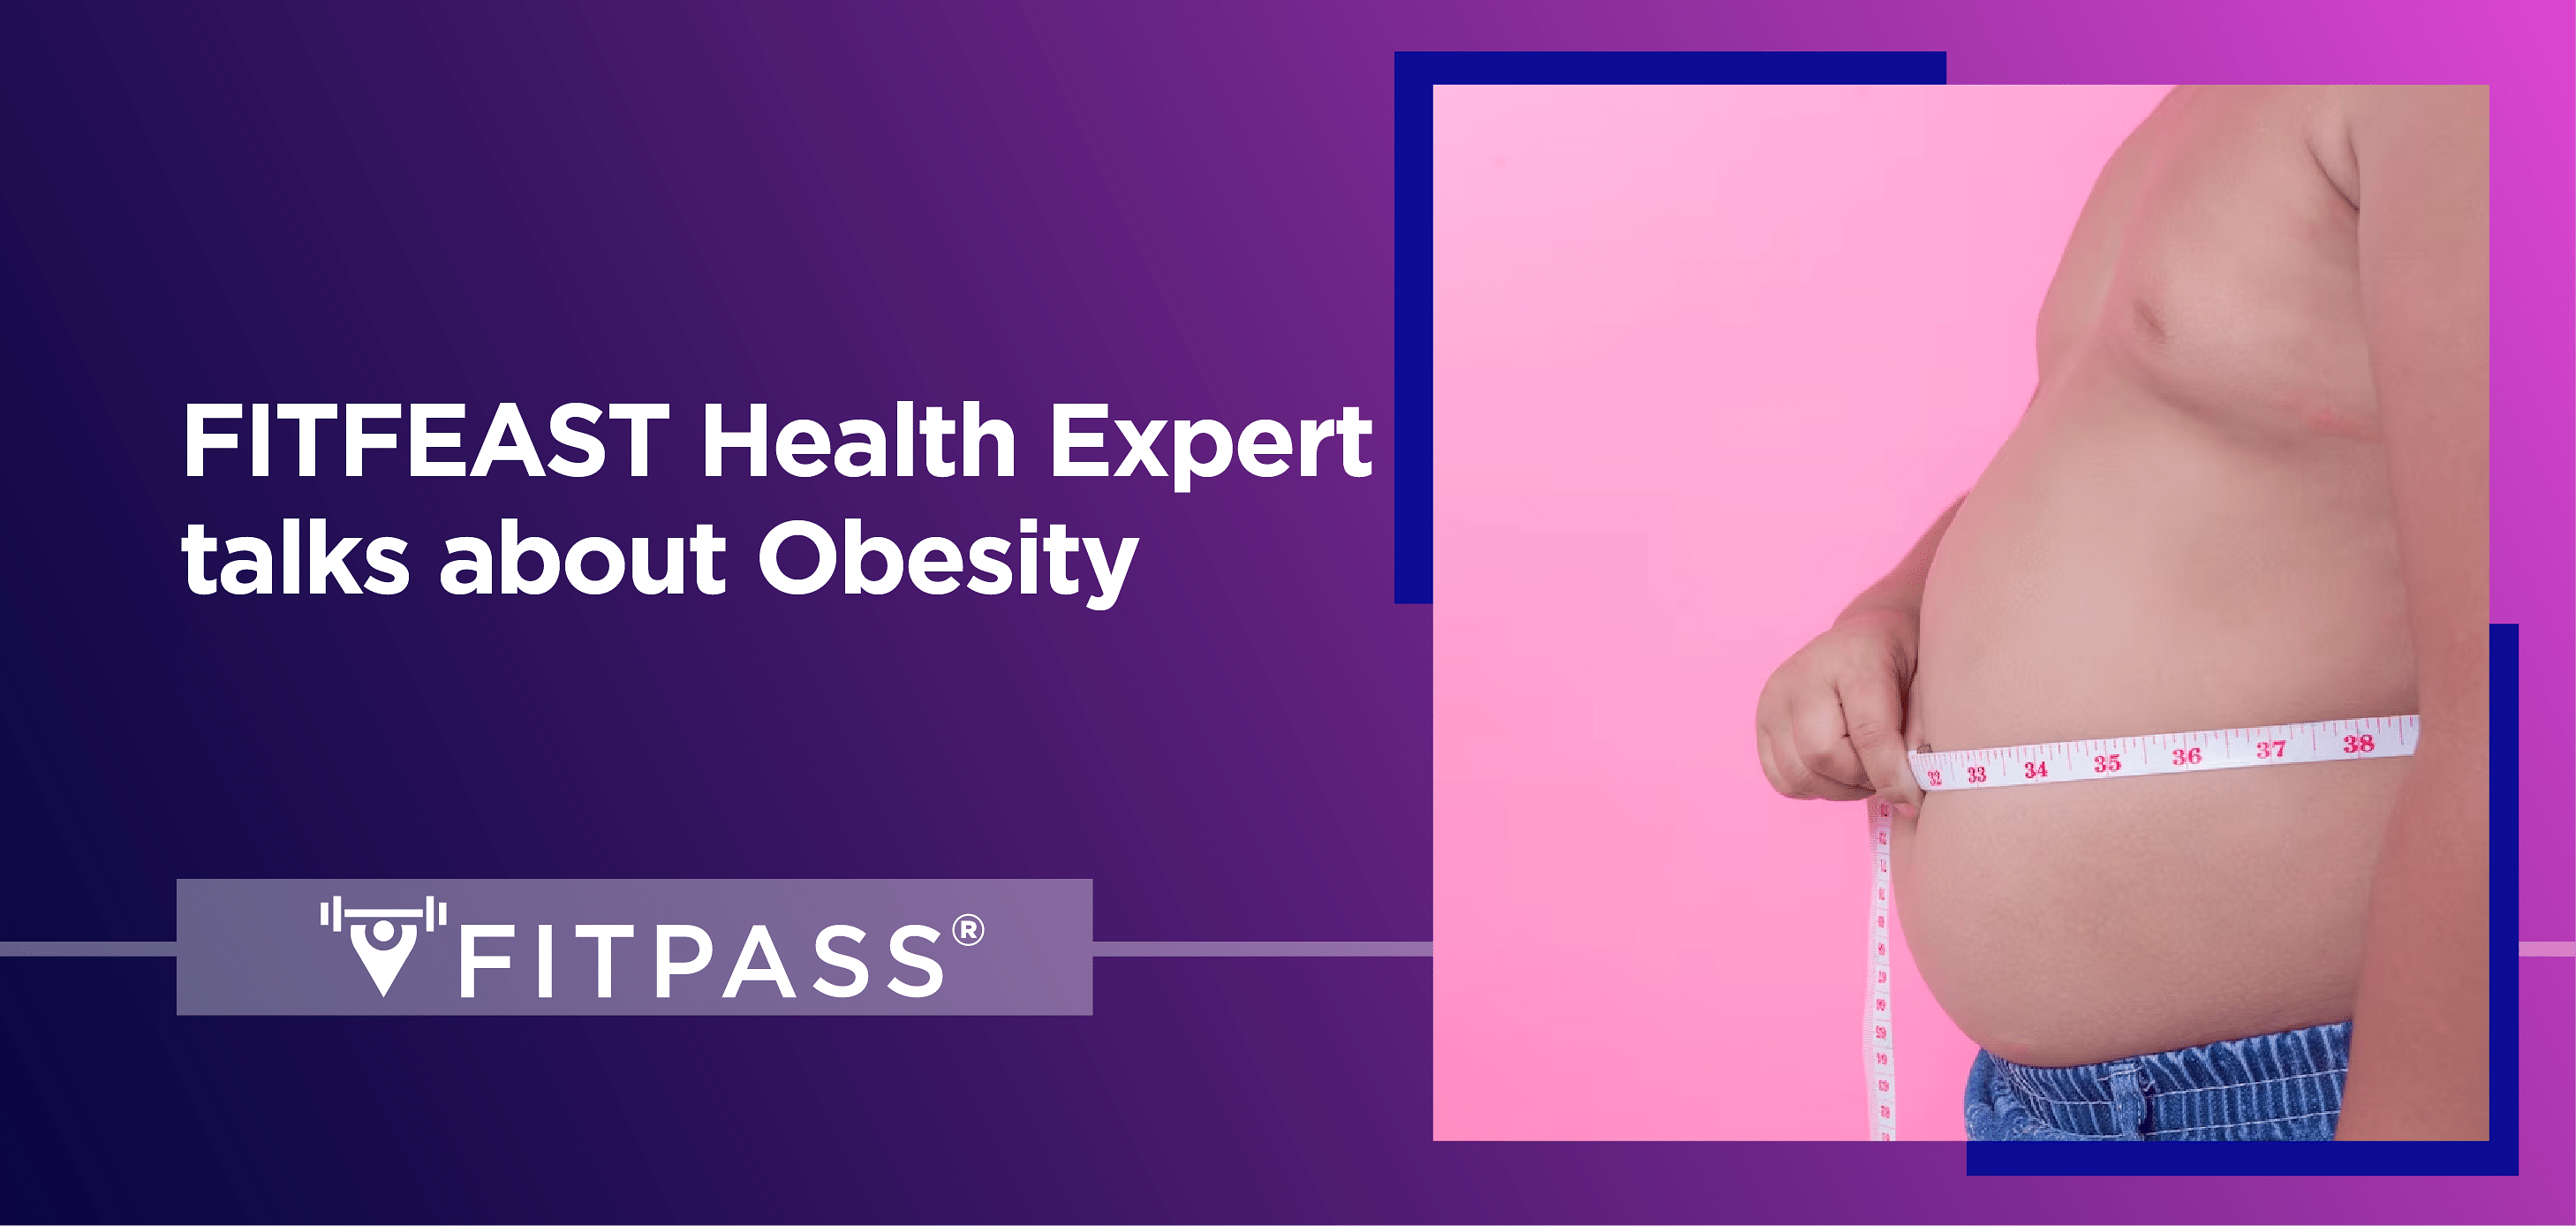 FITFEAST Health Expert talks about Obesity